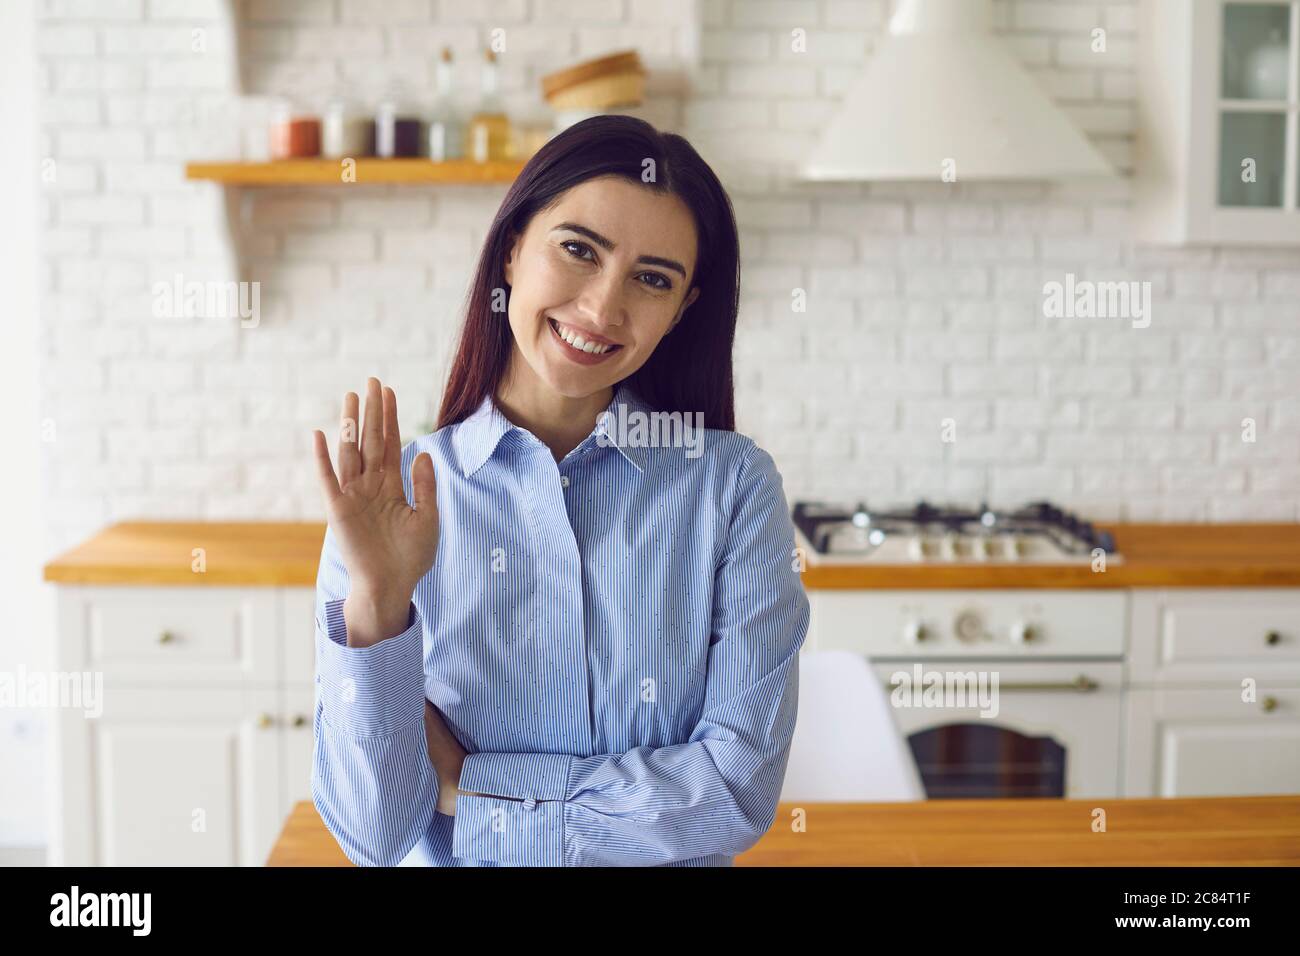 Content woman saying hello while standing in modern kitchen Stock Photo